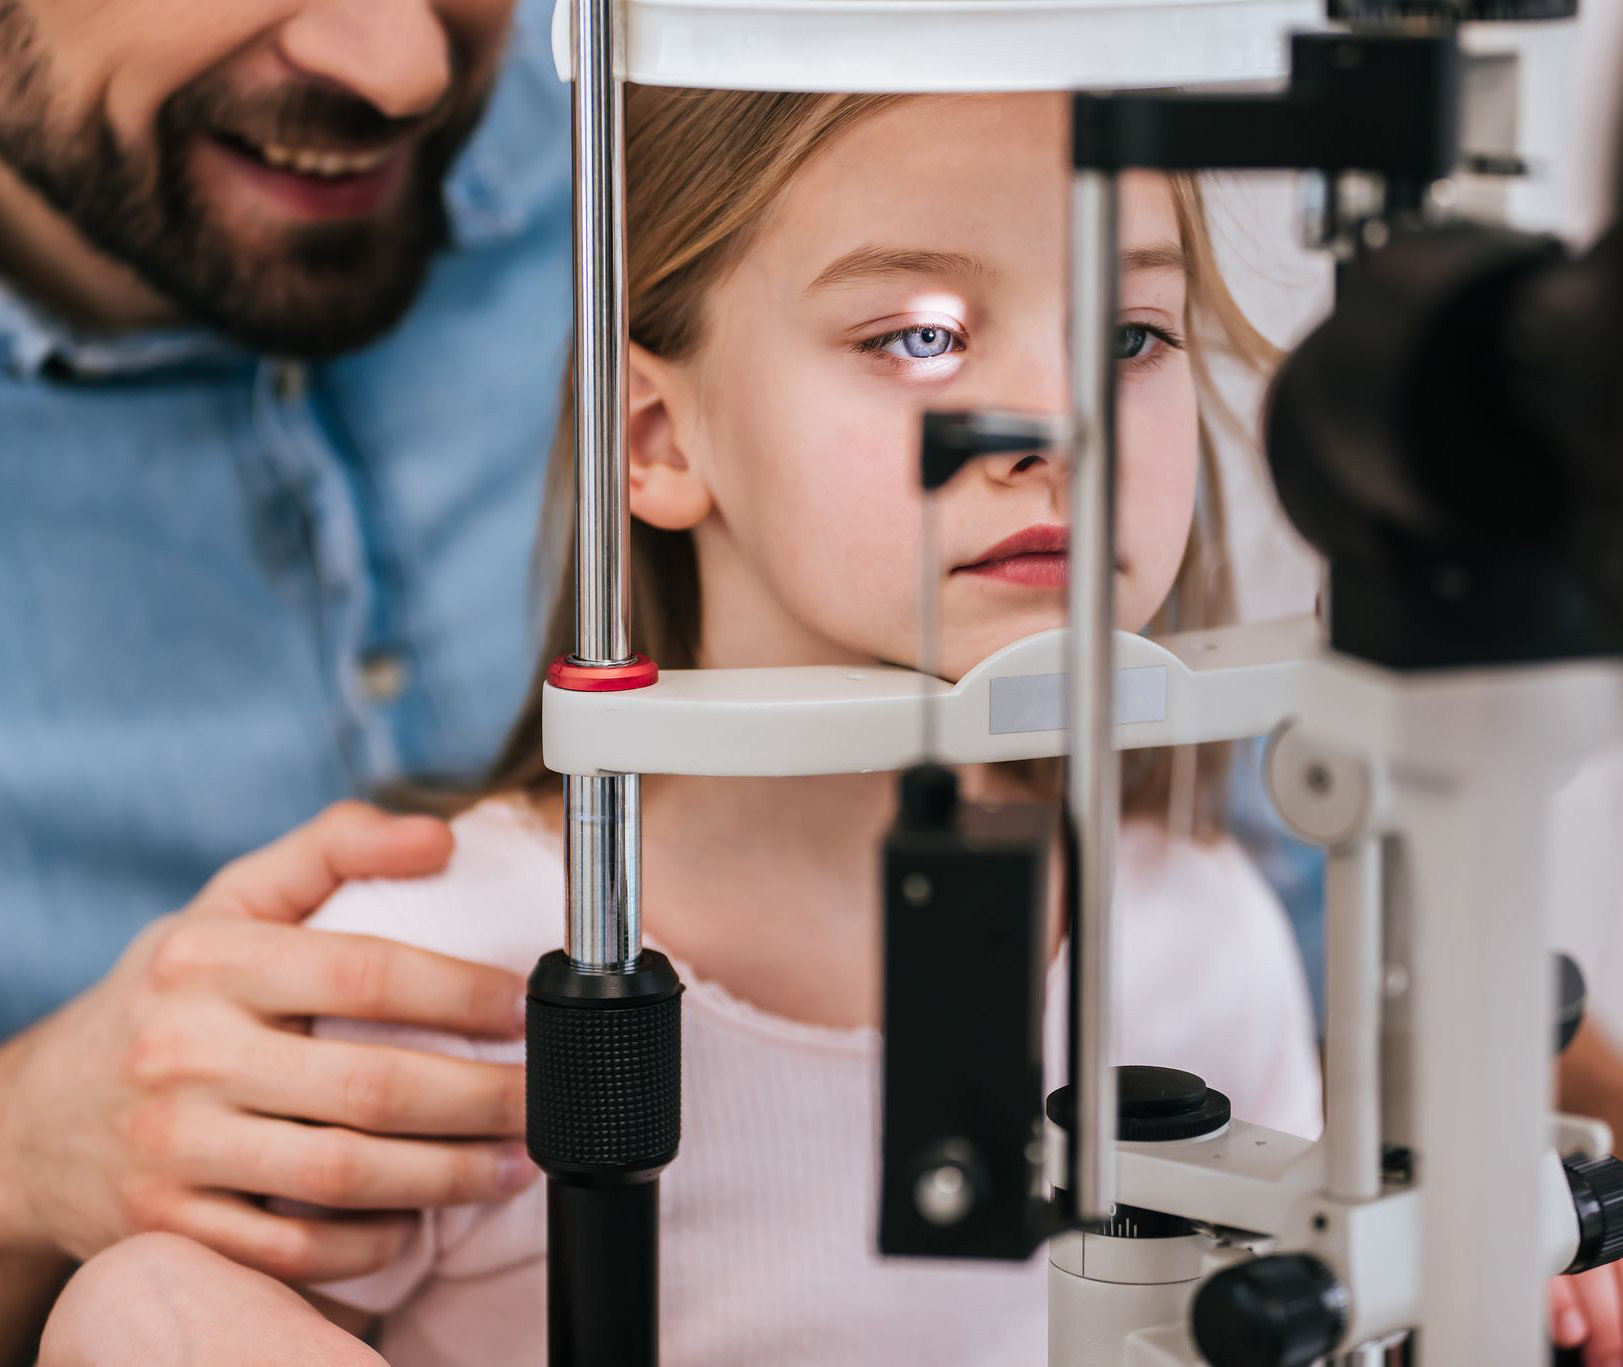 What to expect at your child's eye exam